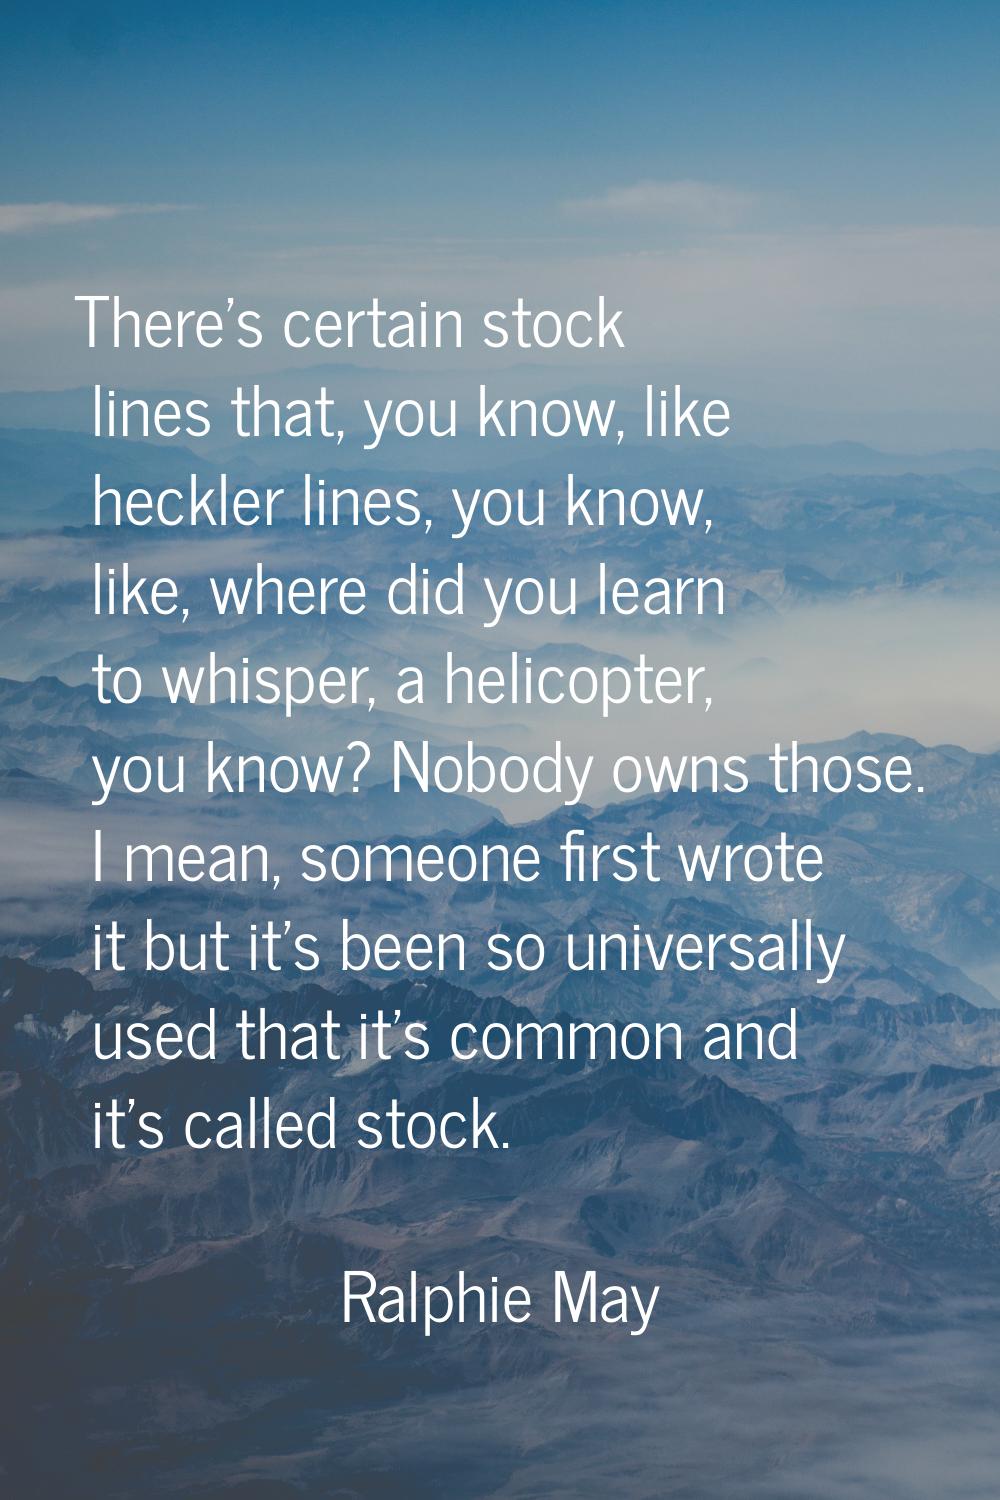 There's certain stock lines that, you know, like heckler lines, you know, like, where did you learn